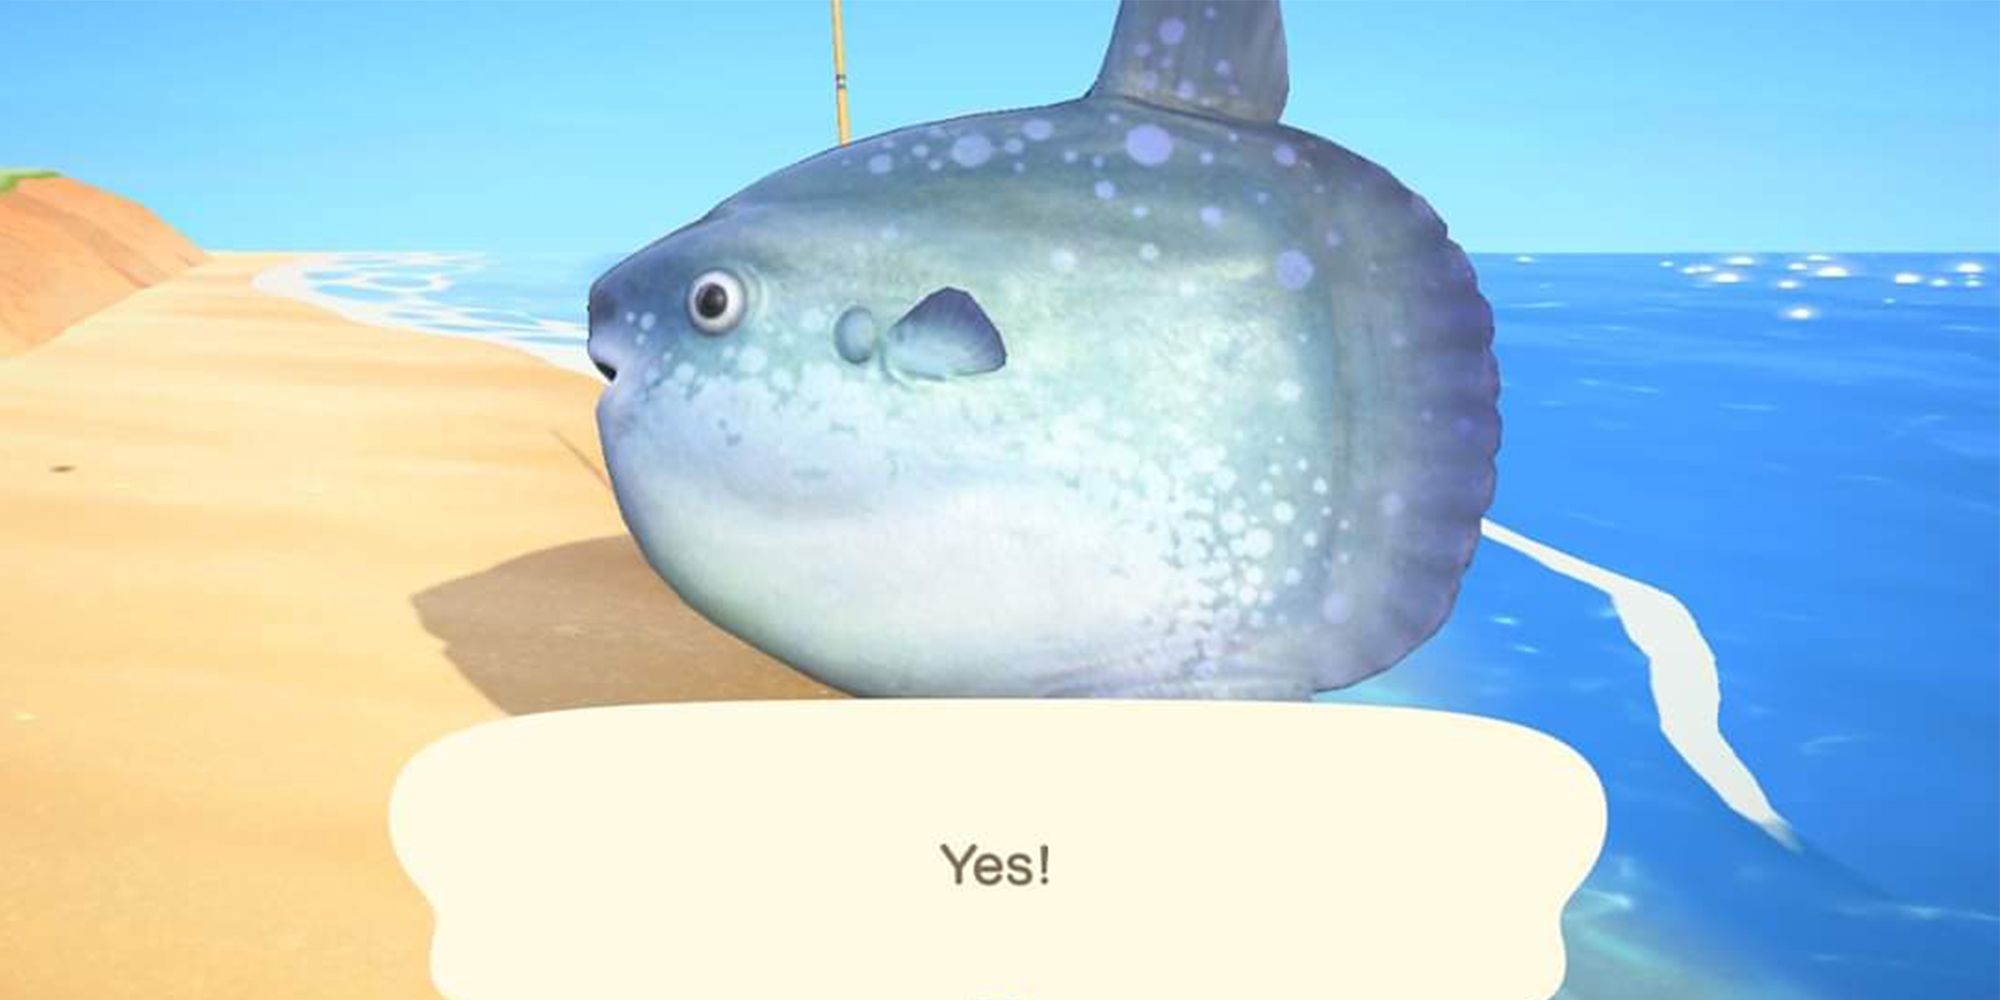 How to Catch The Ocean Sunfish in Animal Crossing: New Horizons